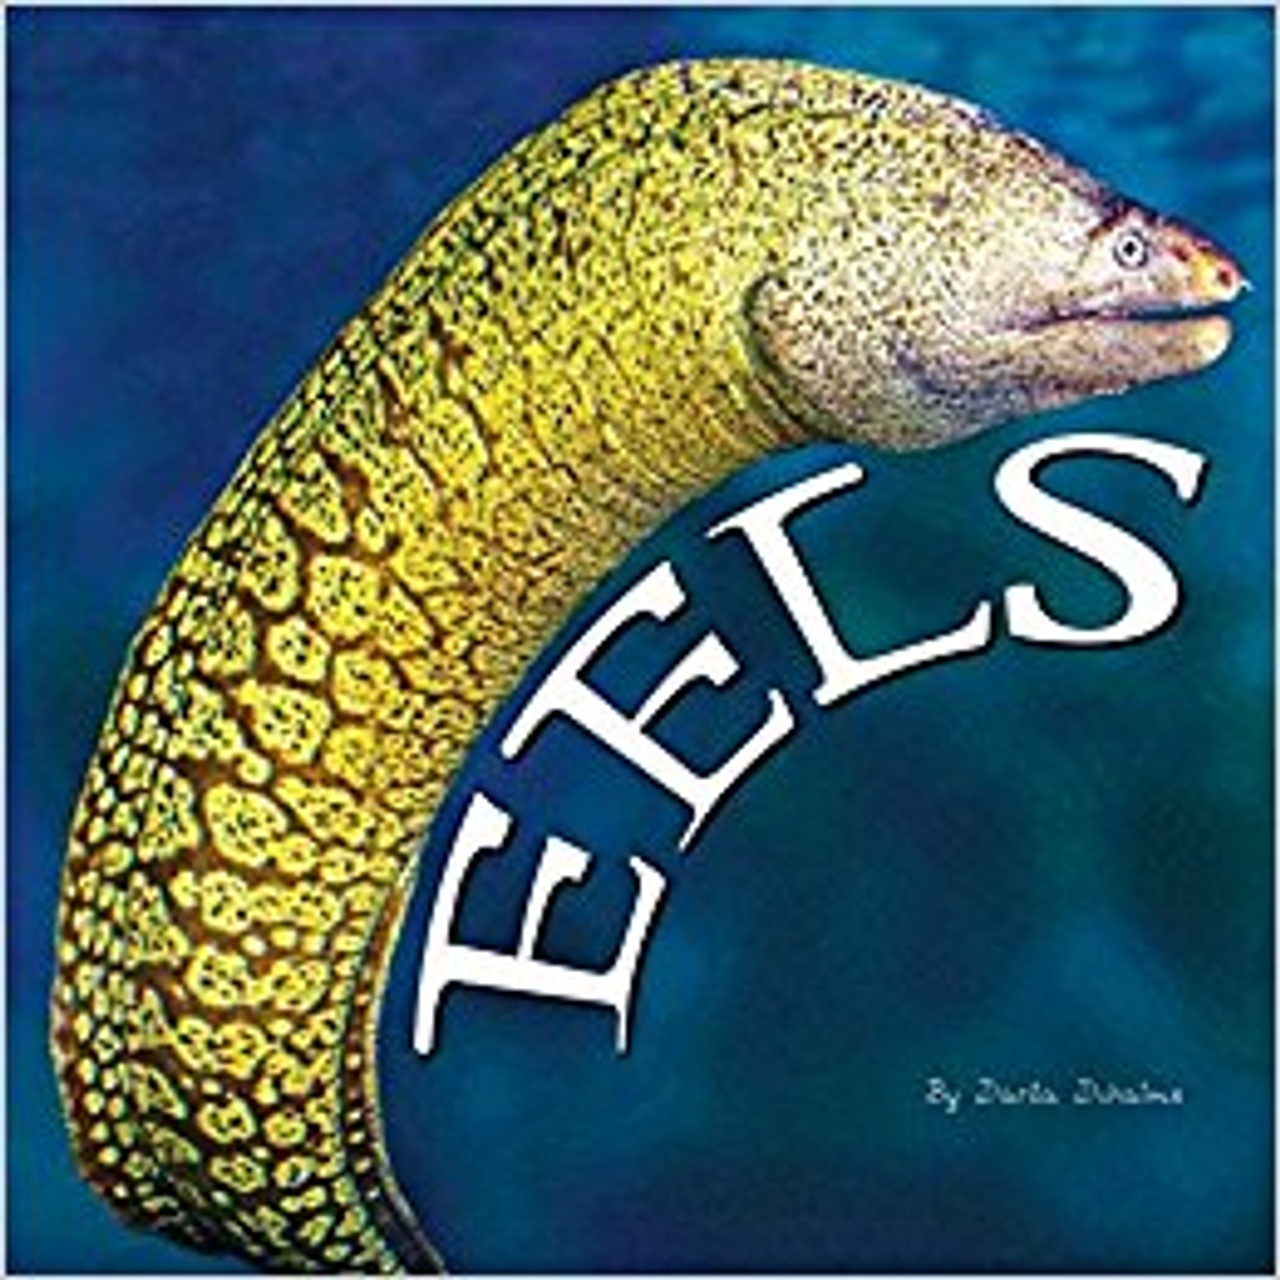 Eels are amazing creatures. They are practically invisible when they are born. And they can swim backward! Dive in to learn more about eels.